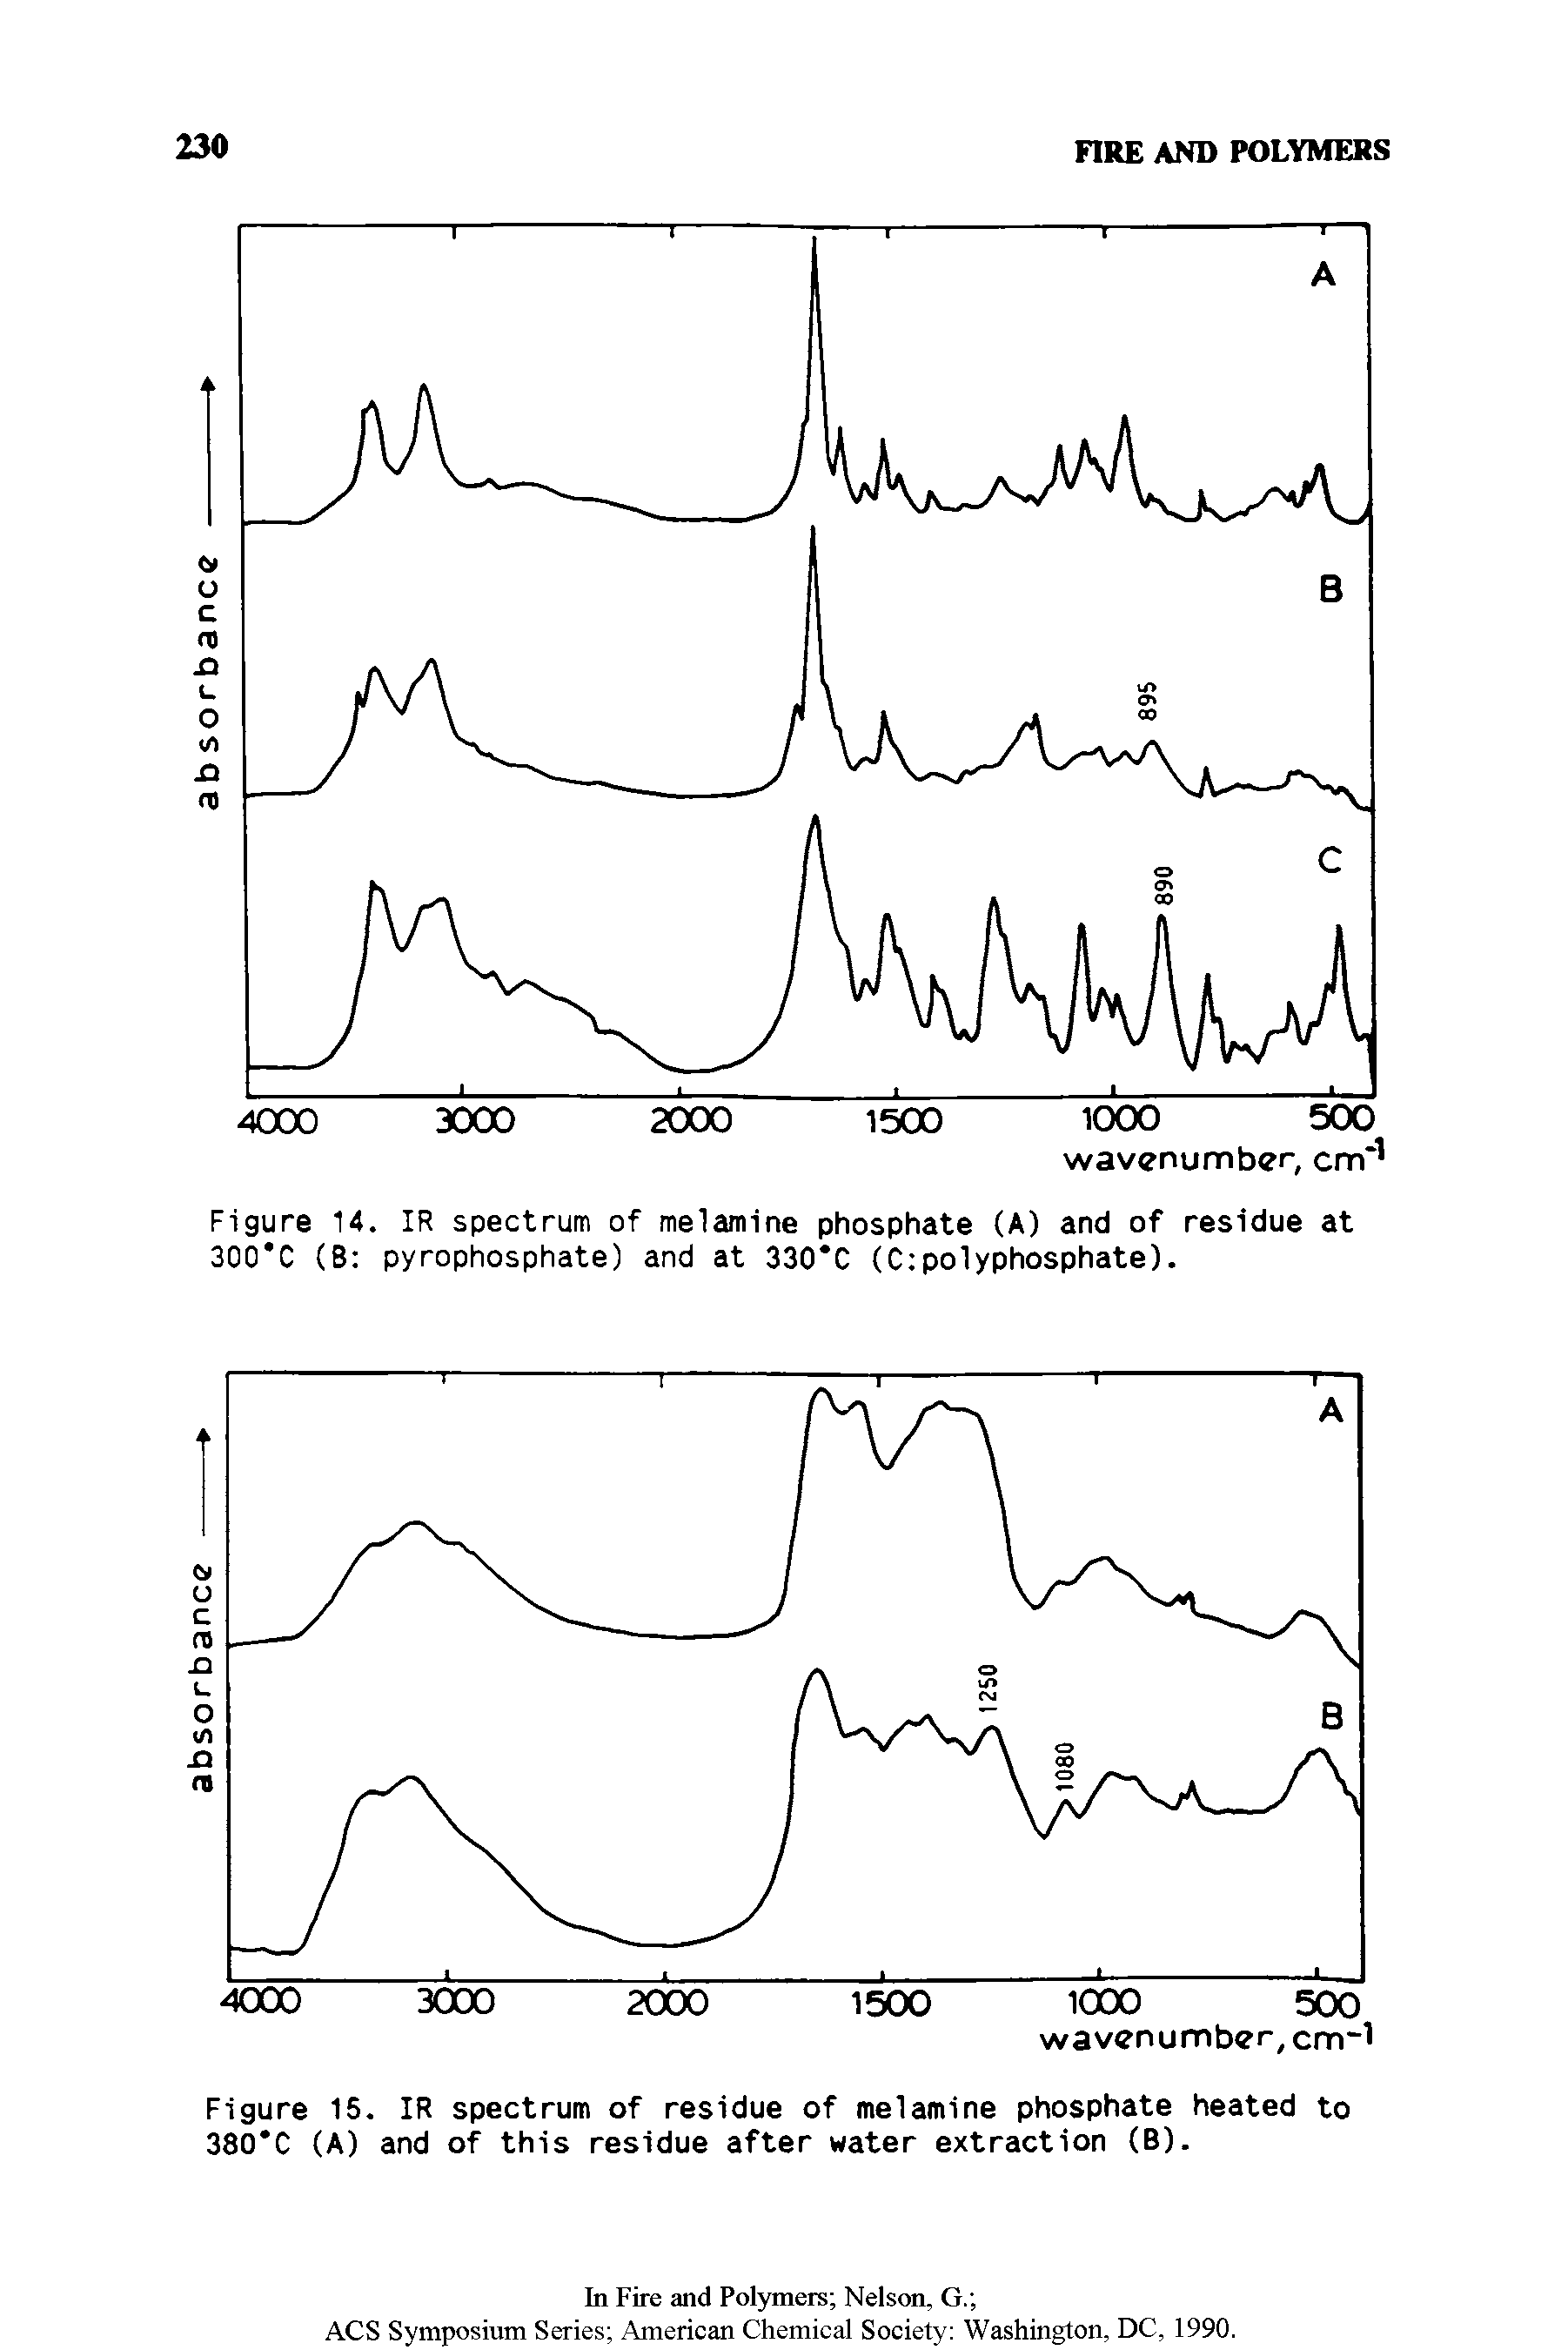 Figure 15. IR spectrum of residue of melamine phosphate heated to 380 C (A) and of this residue after water extraction (B).